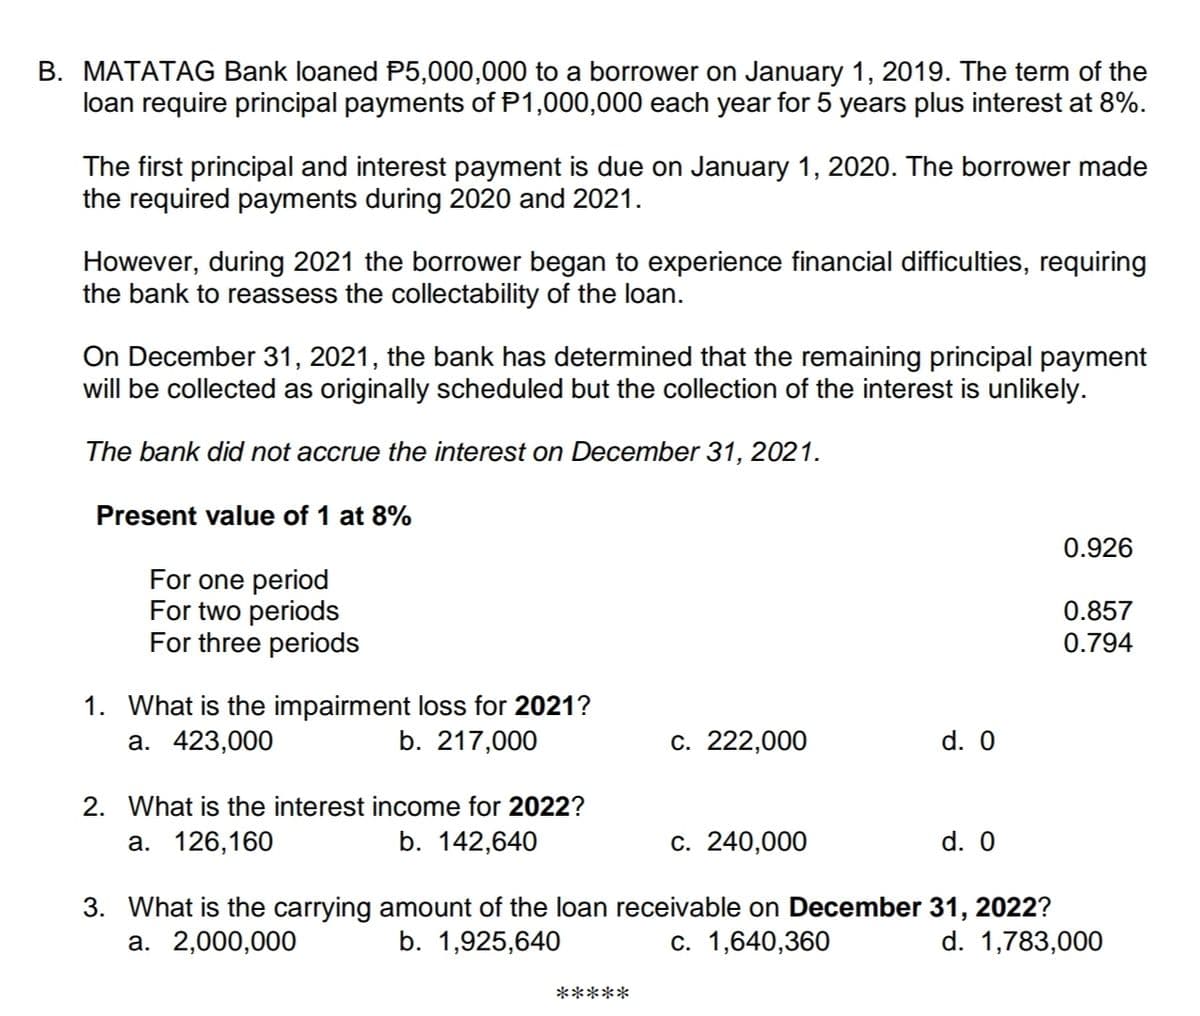 B. MATATAG Bank loaned P5,000,000 to a borrower on January 1, 2019. The term of the
loan require principal payments of P1,000,000 each year for 5 years plus interest at 8%.
The first principal and interest payment is due on January 1, 2020. The borrower made
the required payments during 2020 and 2021.
However, during 2021 the borrower began to experience financial difficulties, requiring
the bank to reassess the collectability of the loan.
On December 31, 2021, the bank has determined that the remaining principal payment
will be collected as originally scheduled but the collection of the interest is unlikely.
The bank did not accrue the interest on December 31, 2021.
Present value of 1 at 8%
0.926
For one period
For two periods
For three periods
0.857
0.794
1. What is the impairment loss for 2021?
а. 423,000
b. 217,000
c. 222,000
d. 0
2. What is the interest income for 2022?
a. 126,160
b. 142,640
c. 240,000
d. 0
3. What is the carrying amount of the loan receivable on December 31, 2022?
а. 2,000,000
b. 1,925,640
c. 1,640,360
d. 1,783,000
*****
